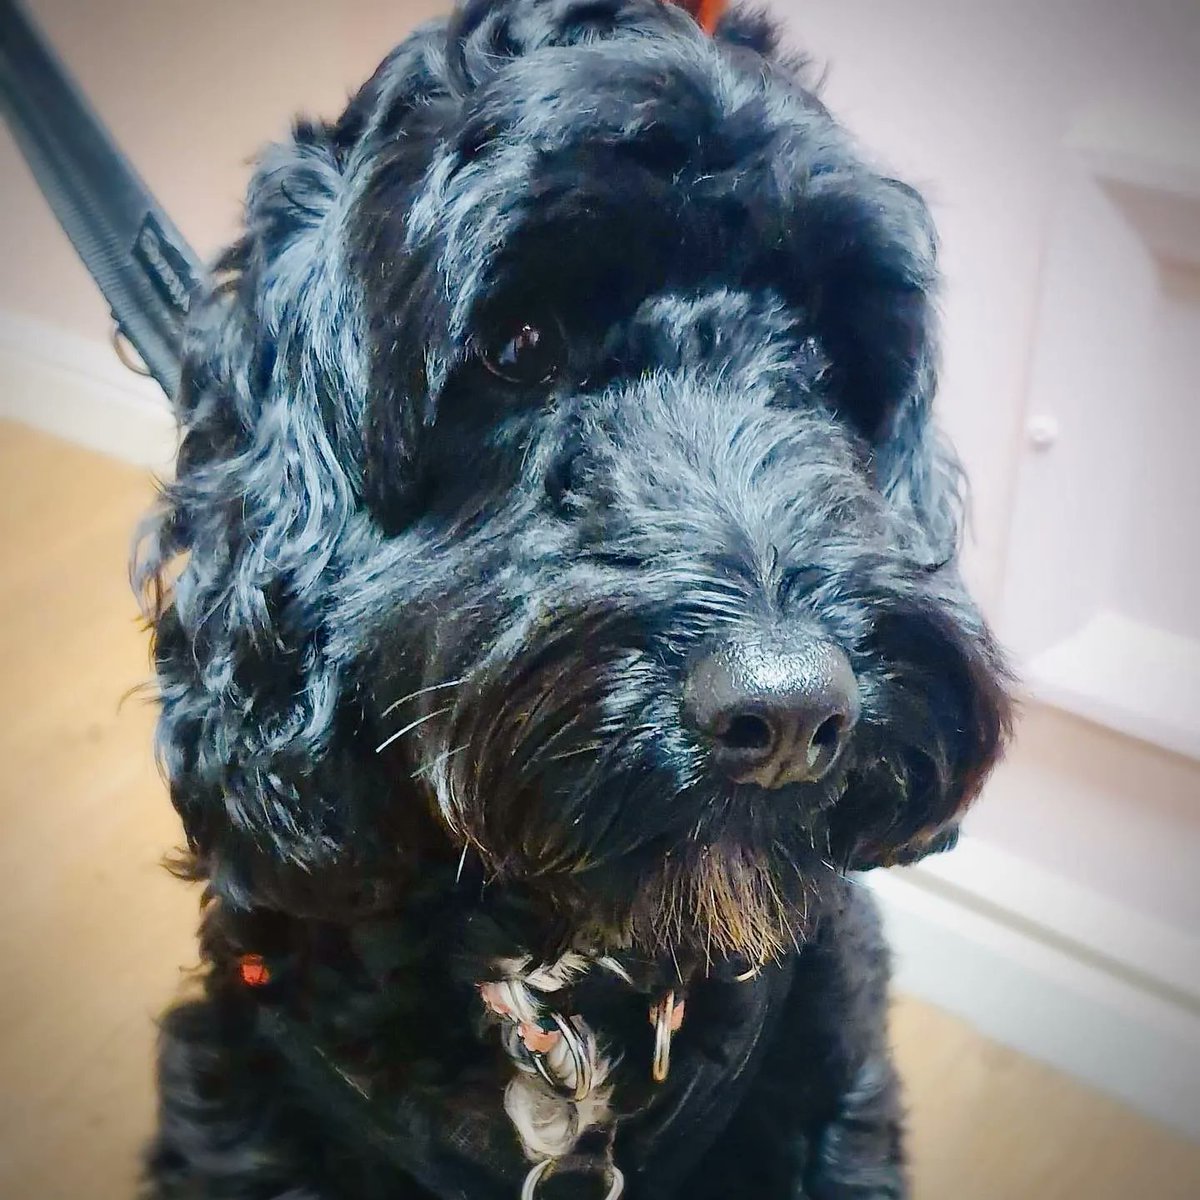 Bring your furry best friend to Plush Cafe, because coffee and cuddles are always better with a wagging tail!

#dessert #baking #instafood #cakes #delicious #sweet #bakery #desserts #sweettooth #chocolatecake #Rainbowbagel #rainbowbagels #plushcafe #york #onlyinyork #loveyork